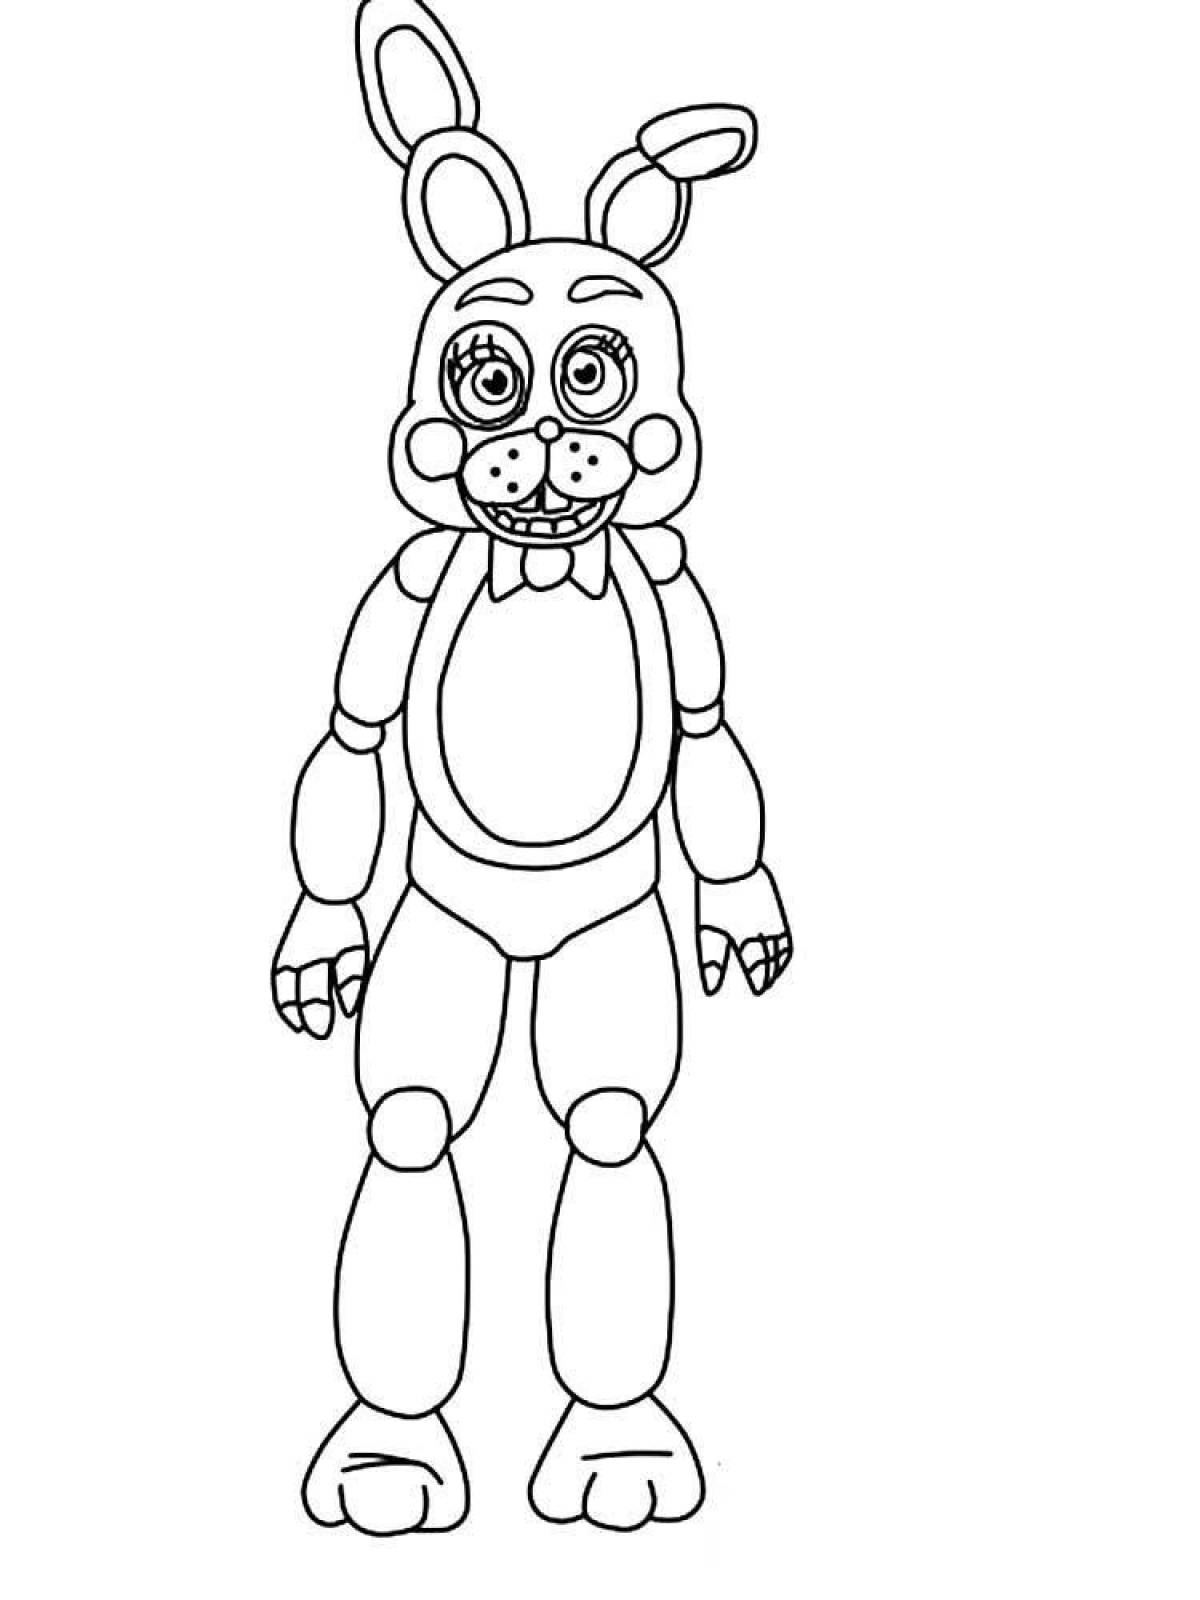 Amazing fnaf 2 coloring page